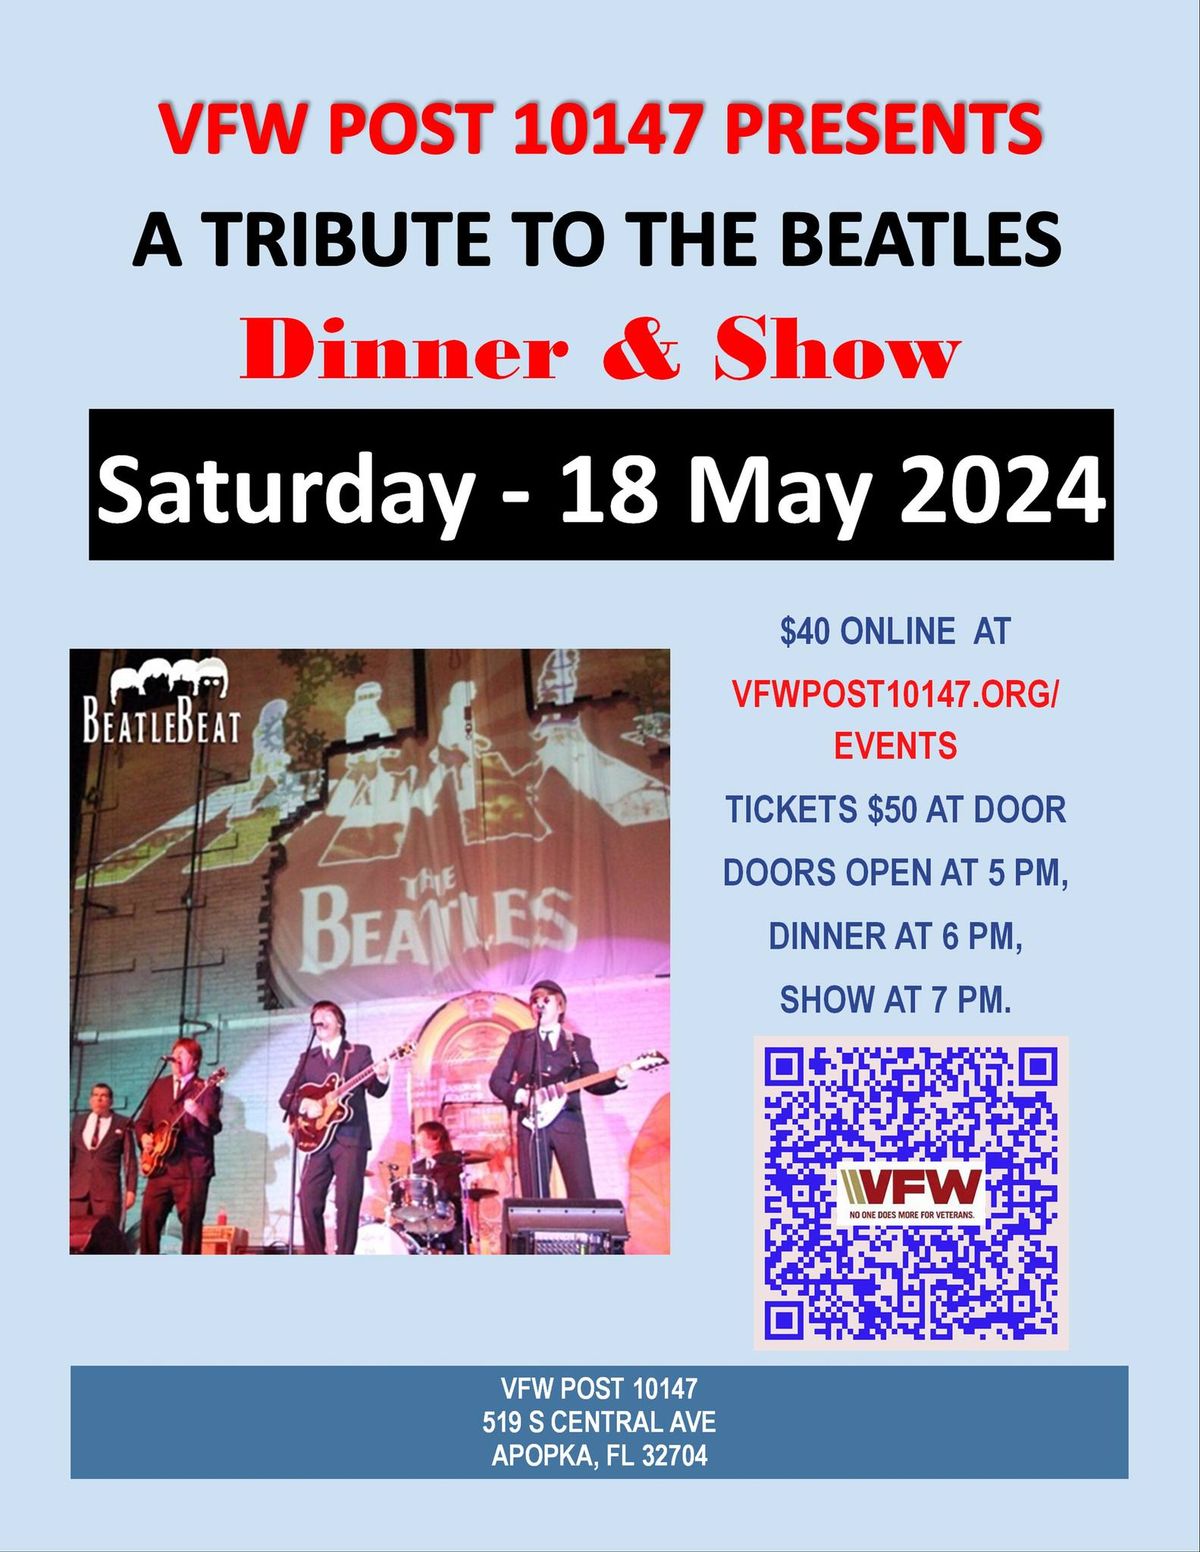 A Tribute to the Beatles - Dinner and Show